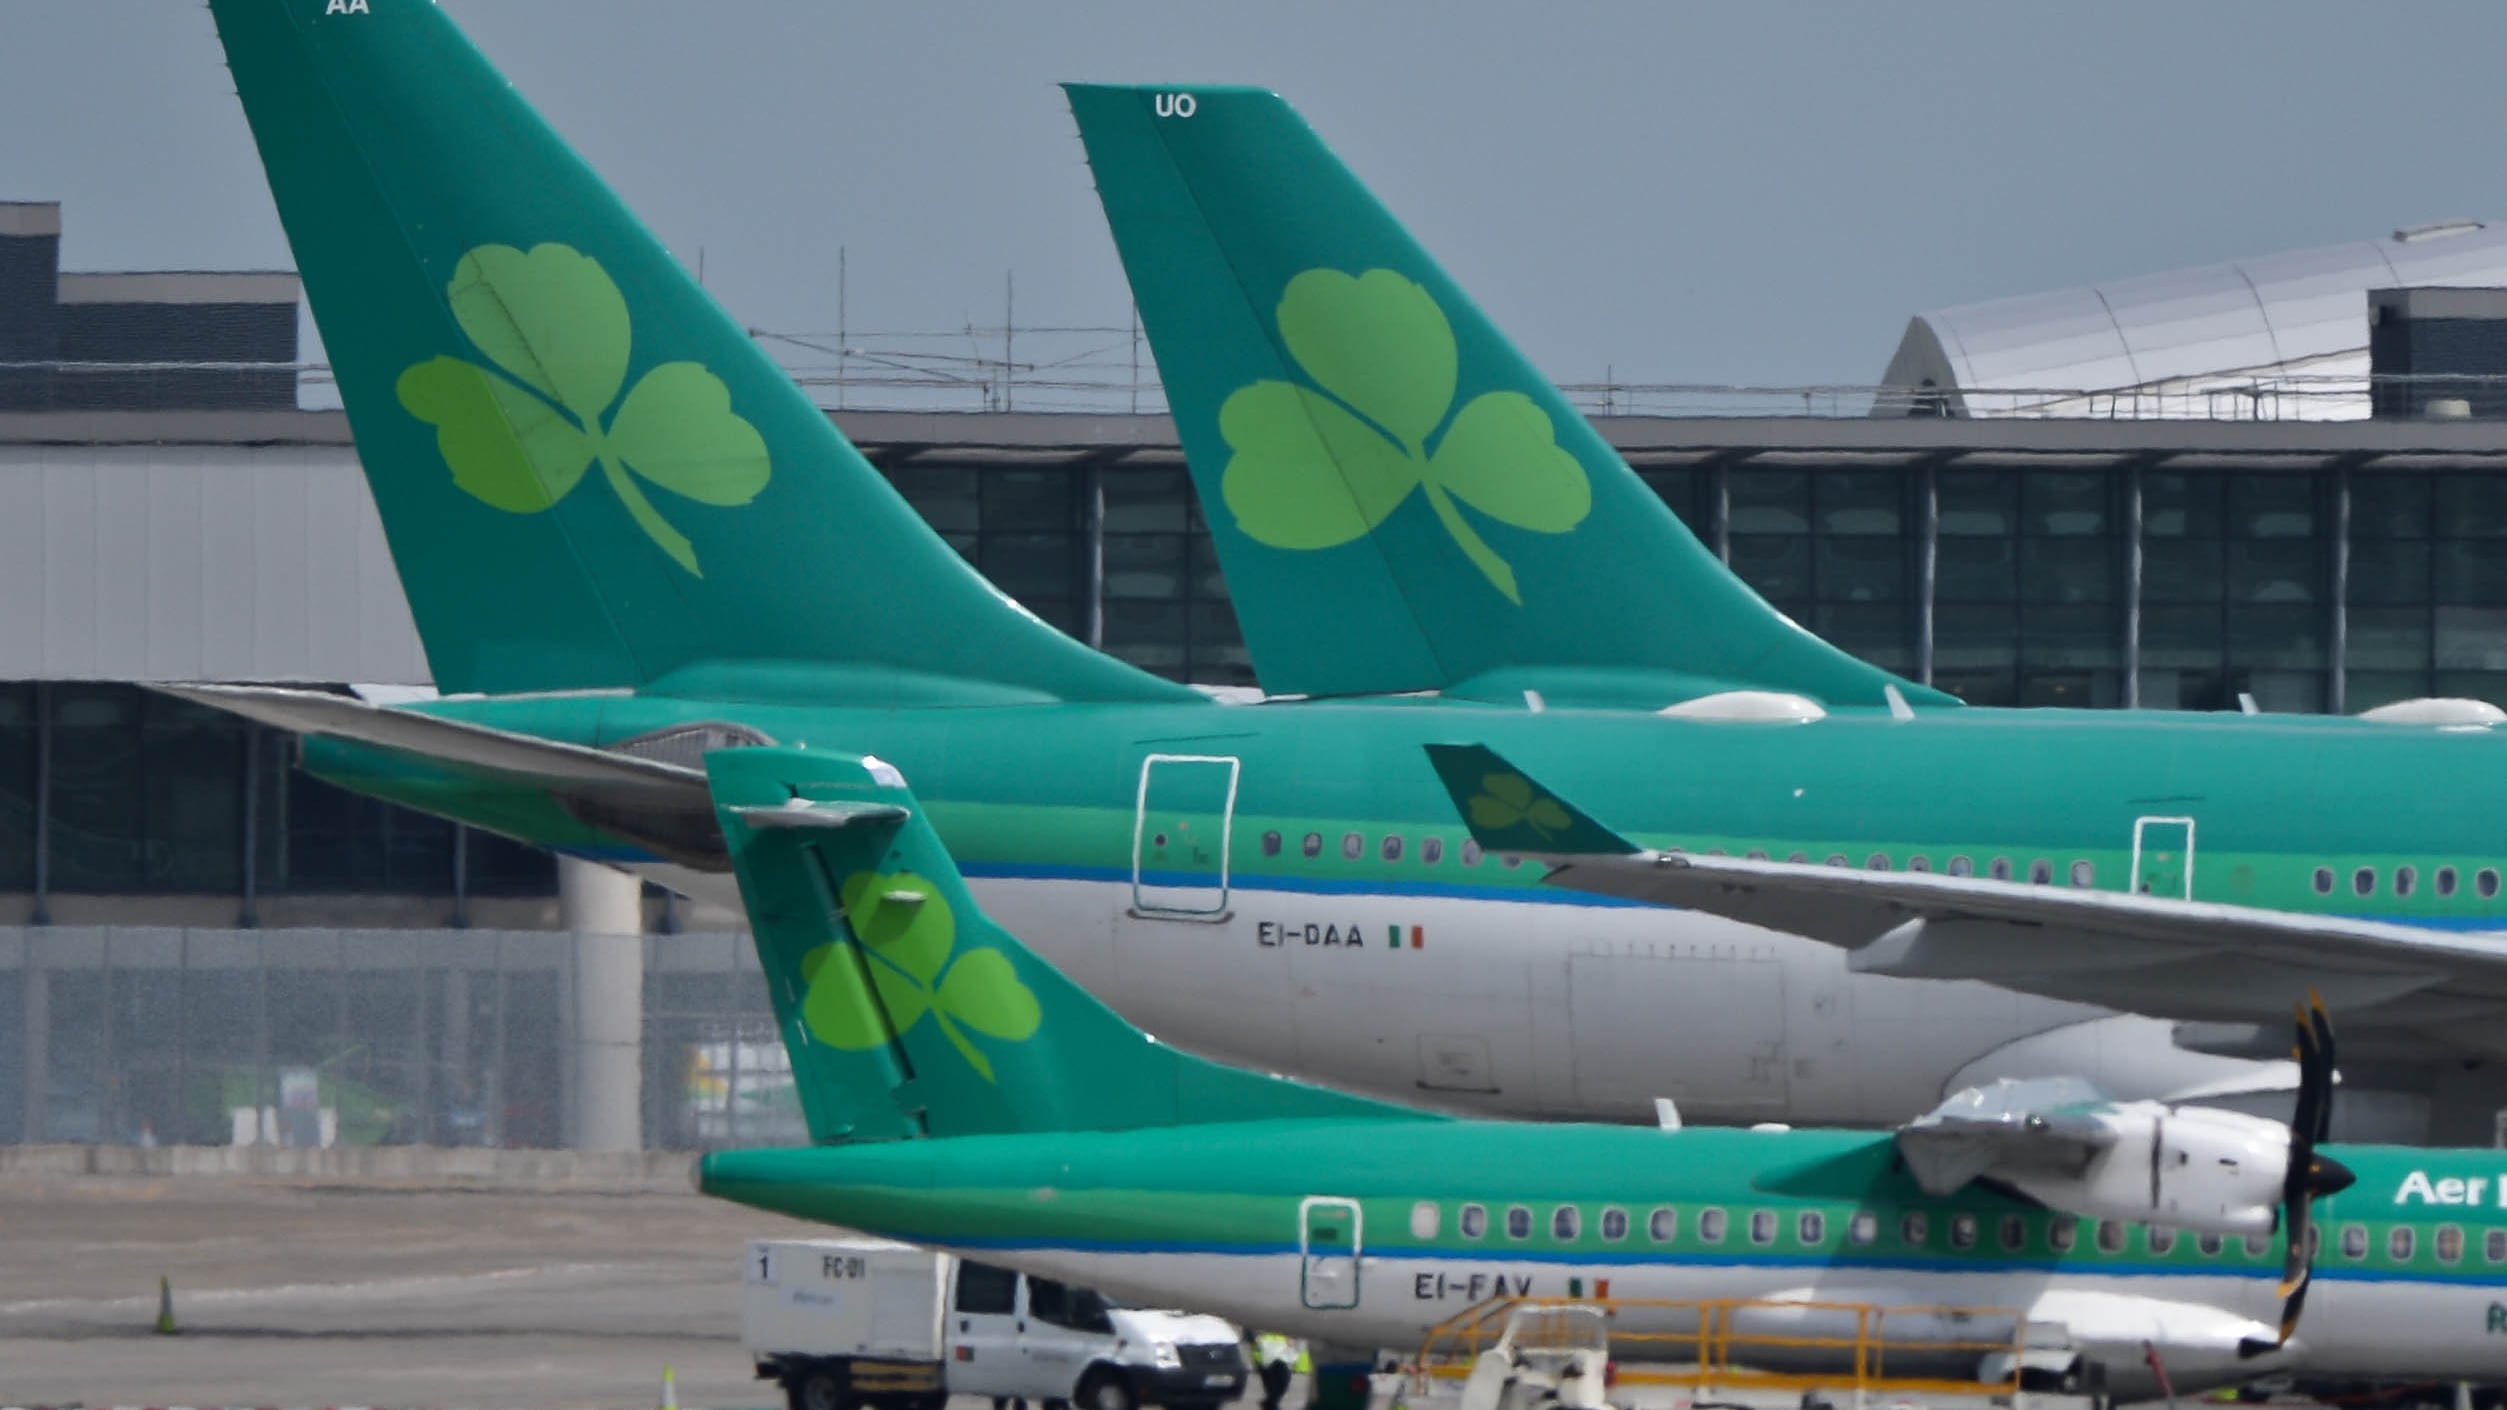 Pilots at Aer Lingus are staging strike action